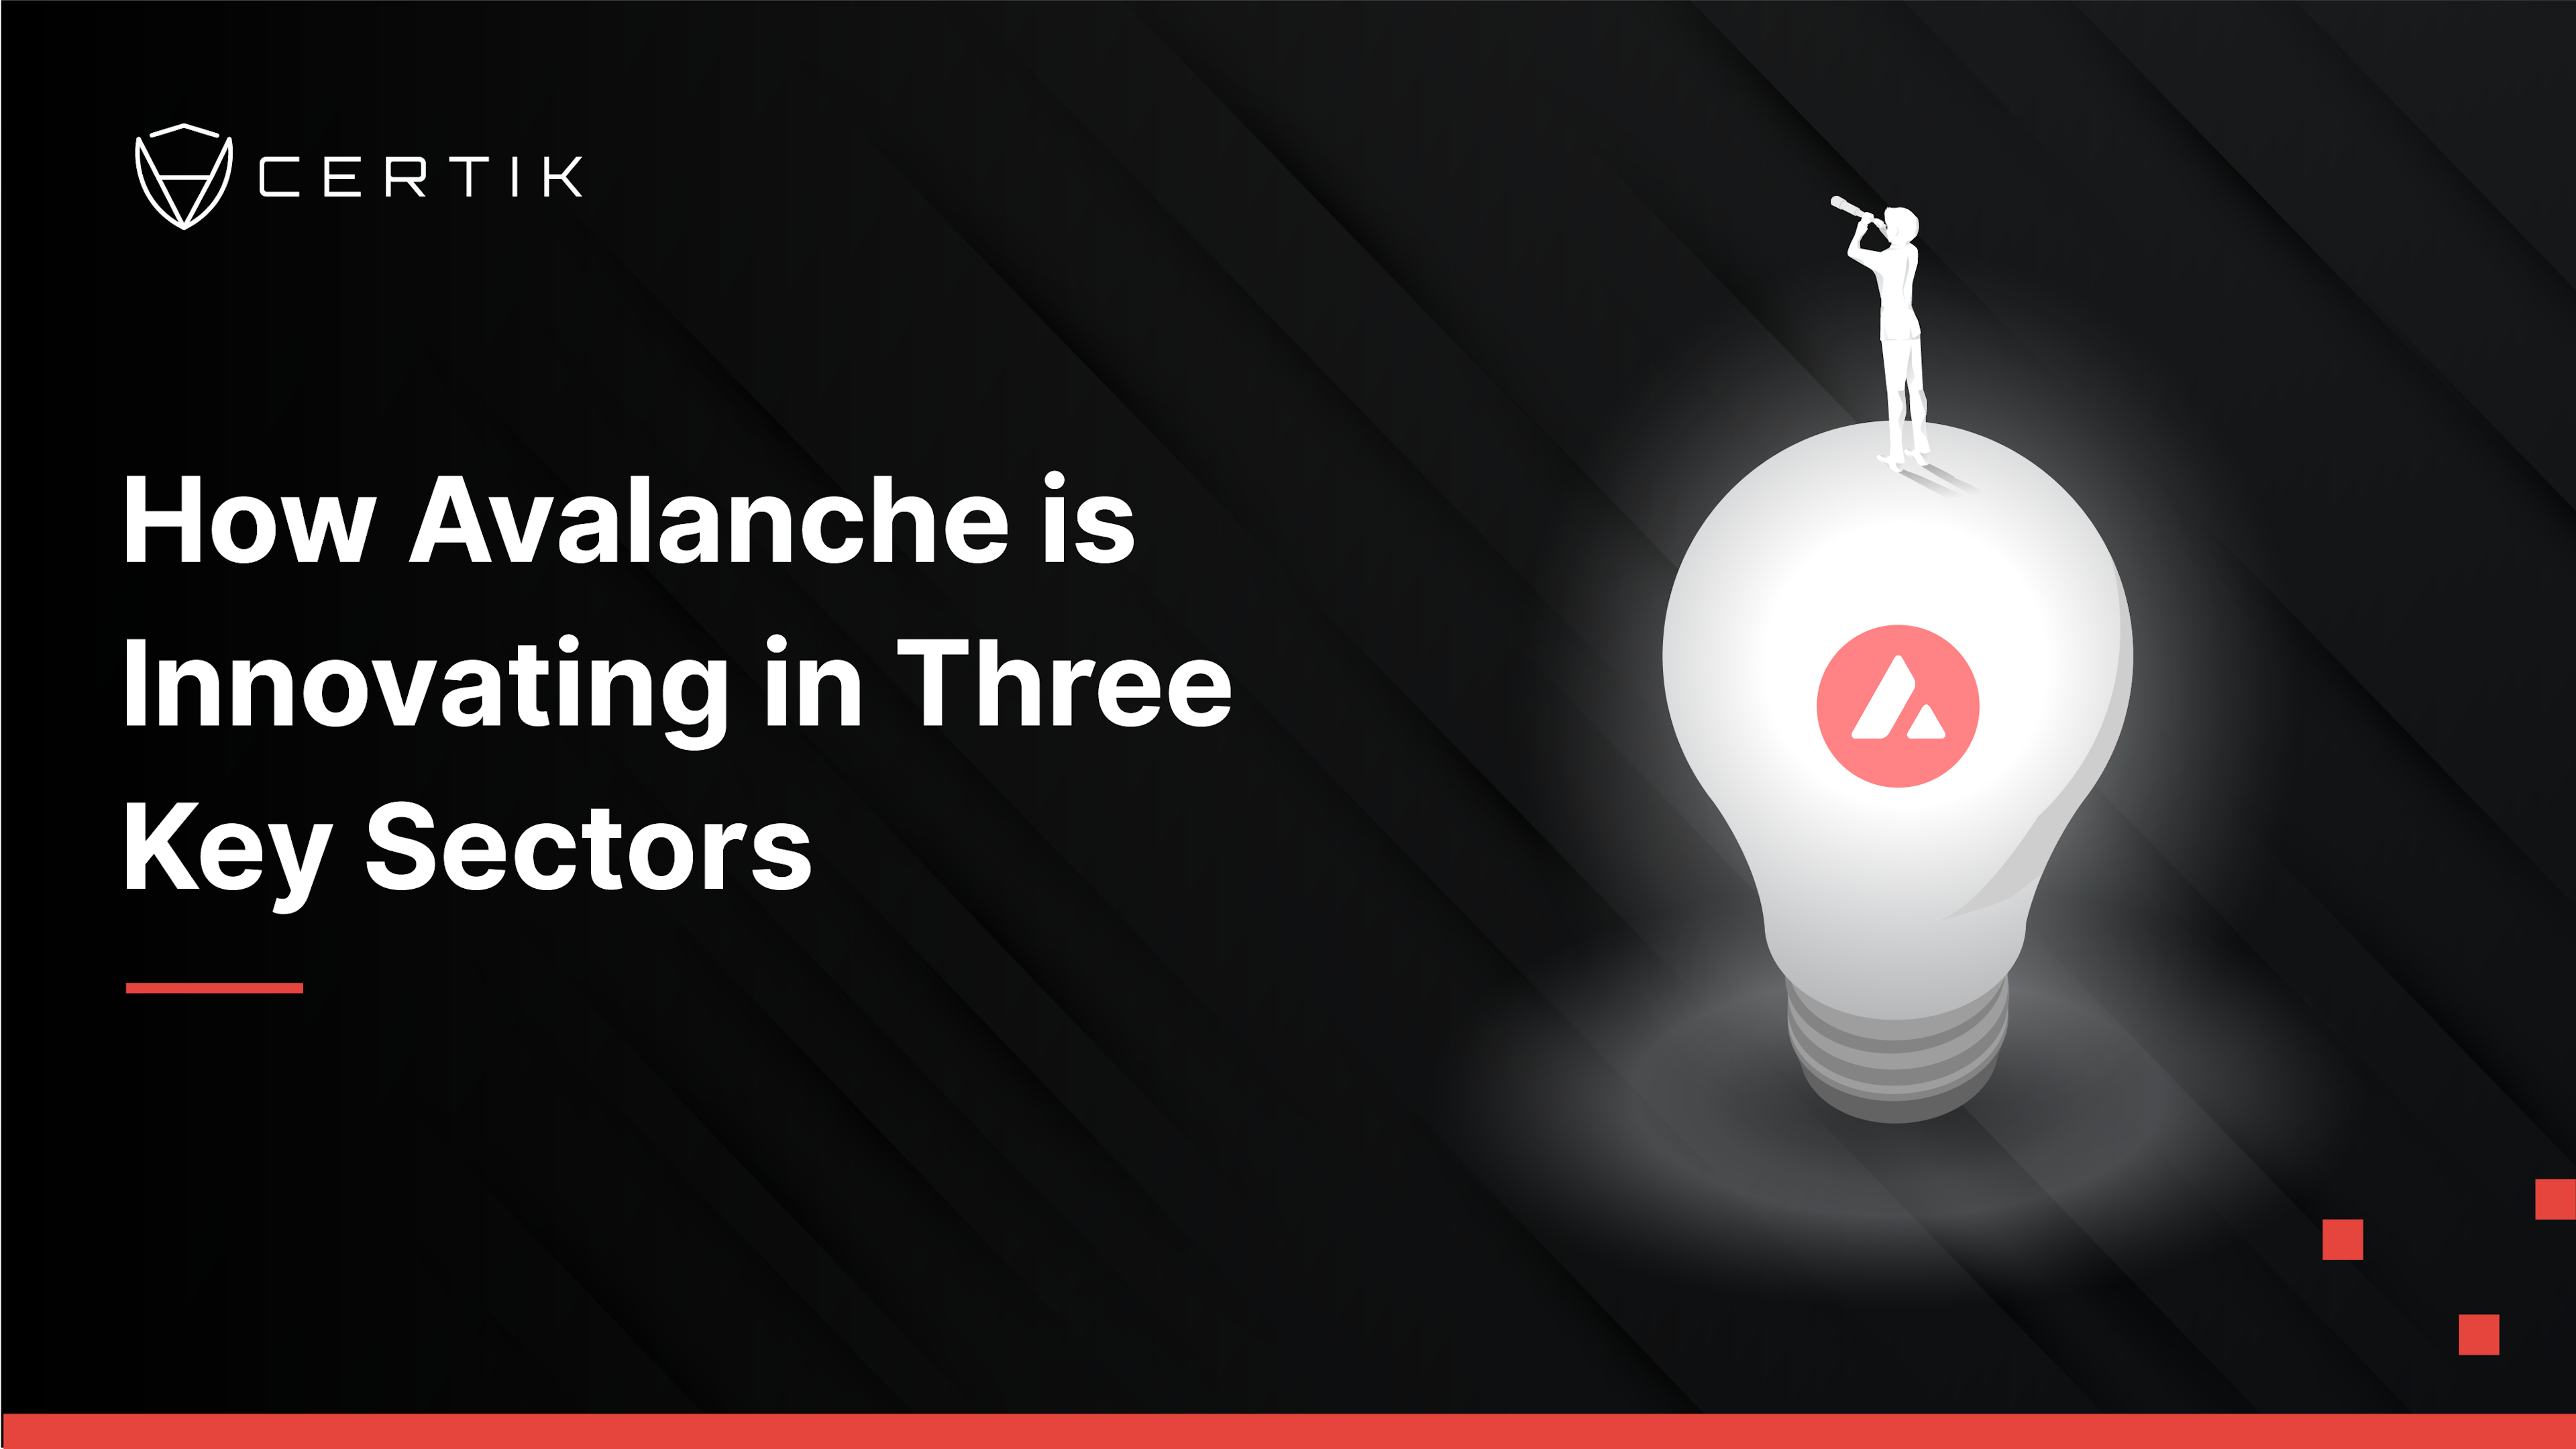 How Avalanche is Innovating in Three Key Sectors